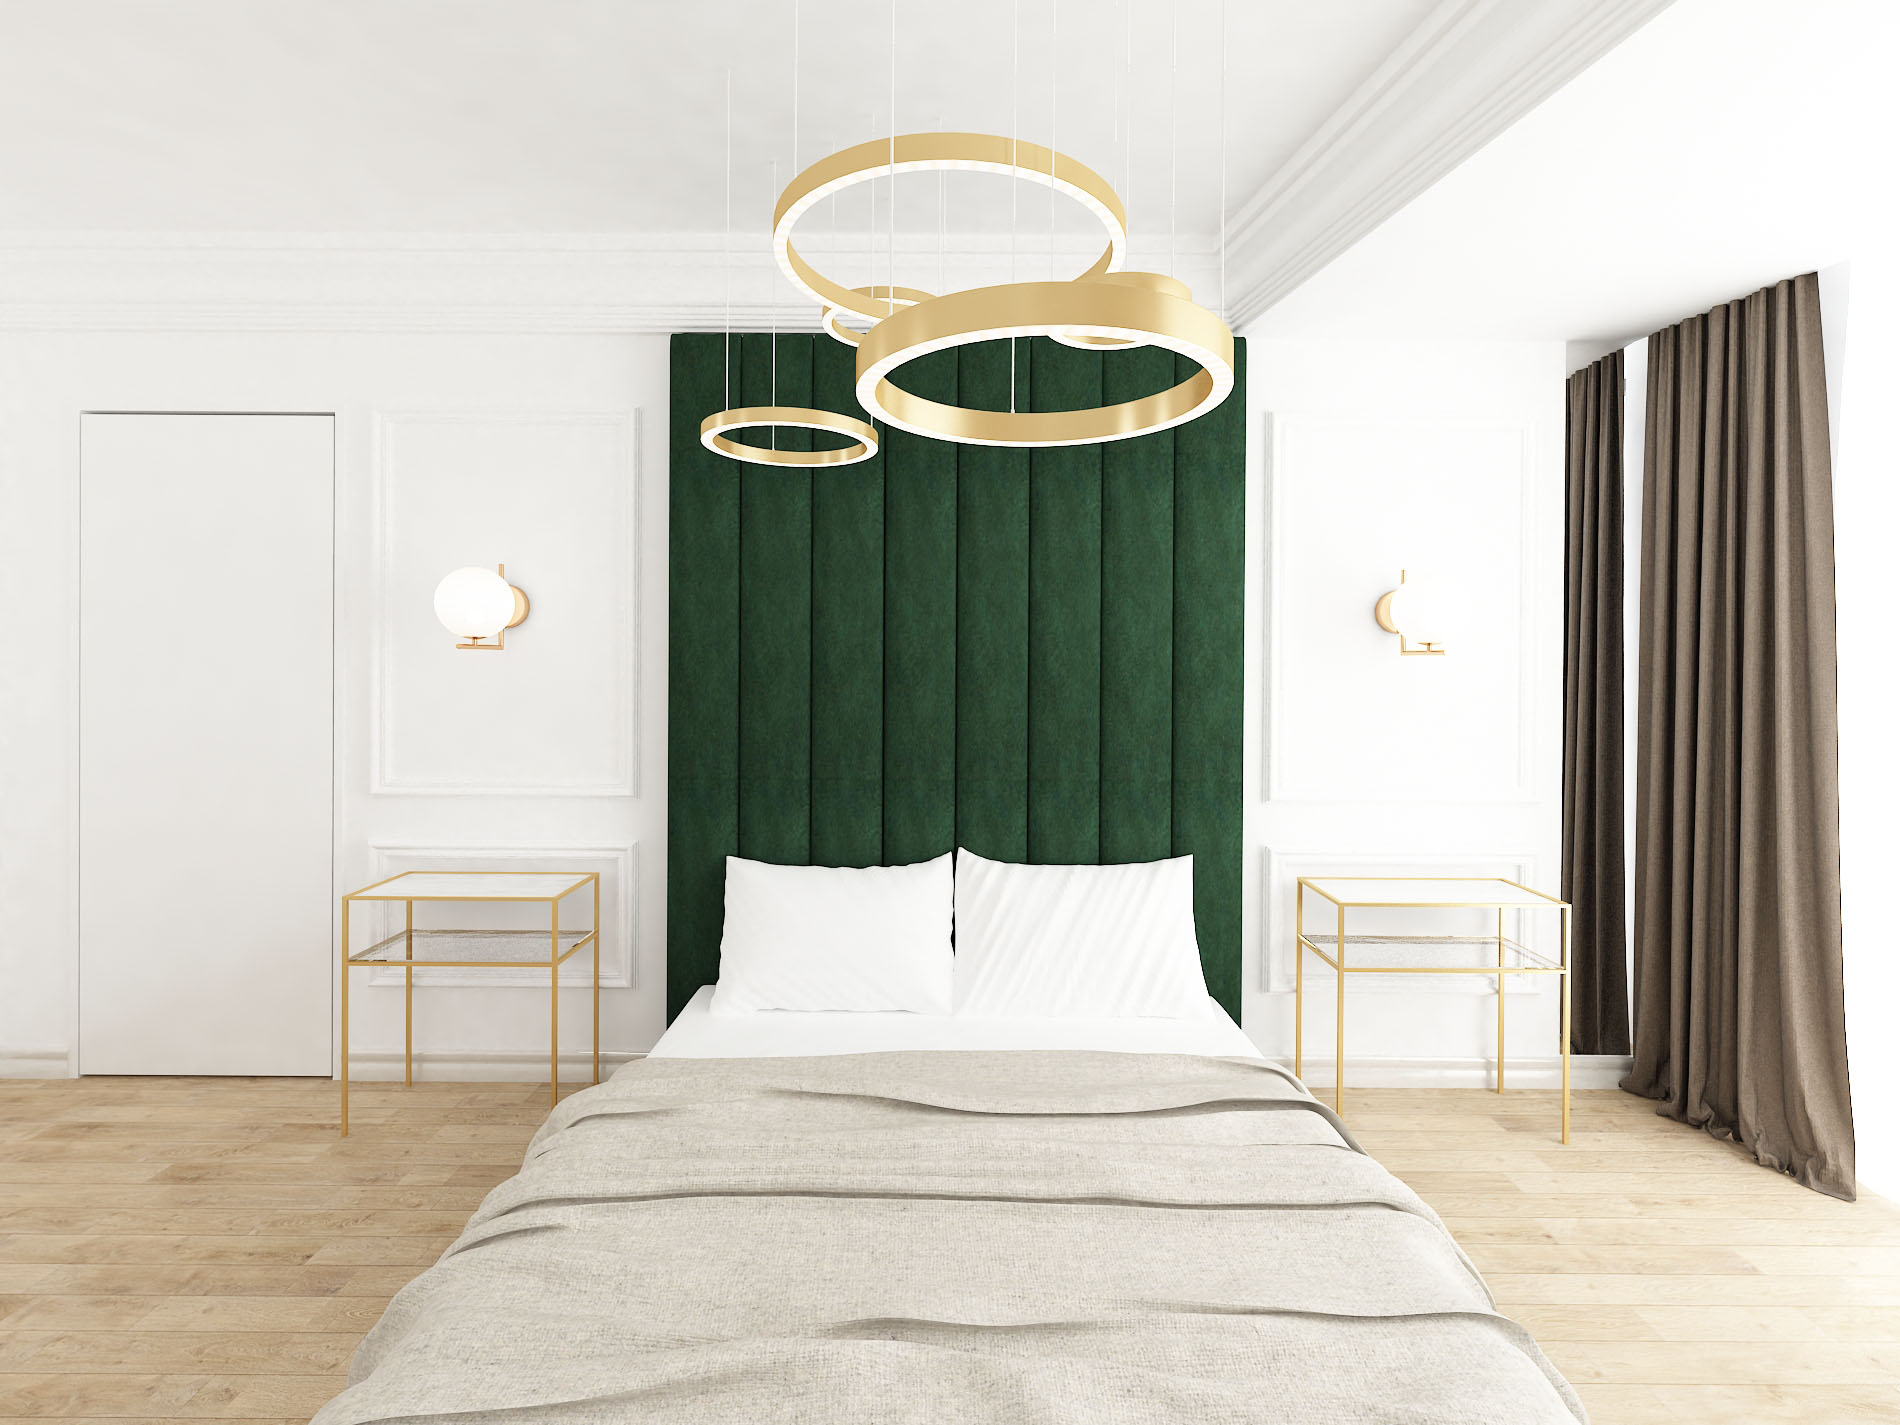 Contemporary bedroom with classical elements and details in dark green and gold.